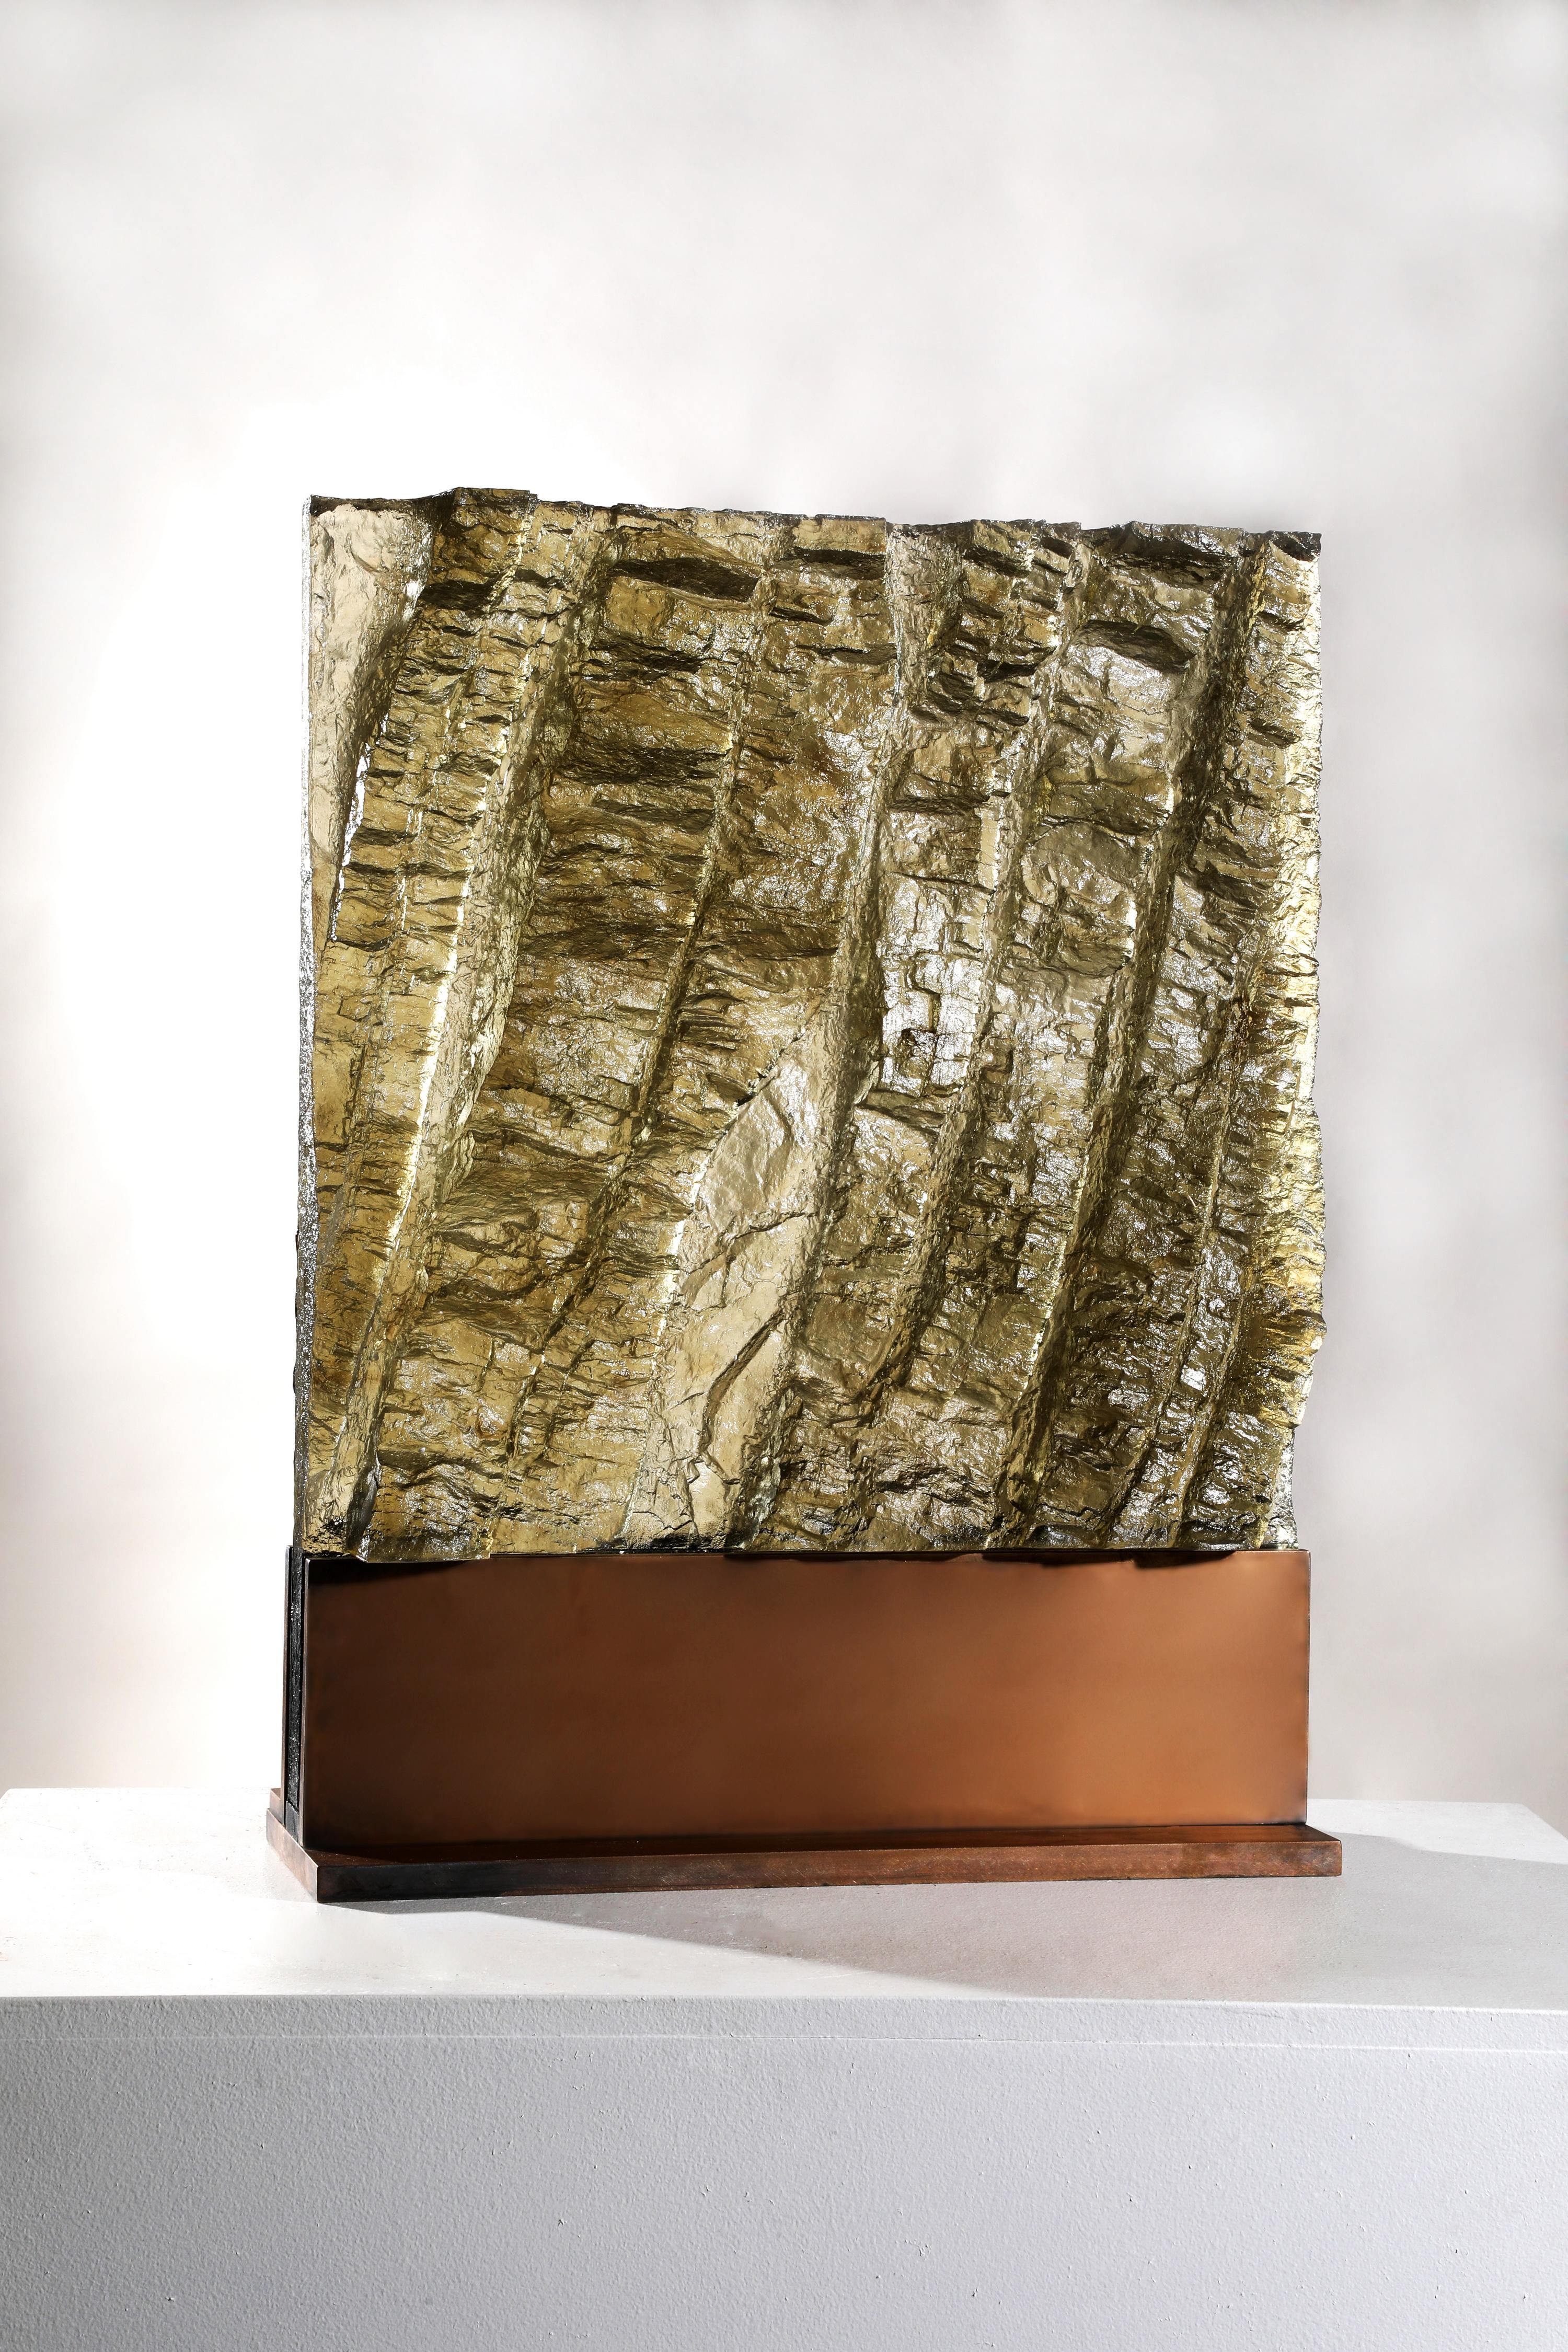 Contemporary Cast Glass Sculpture, 'Geologic Editions #9', 2018 by David Ruth